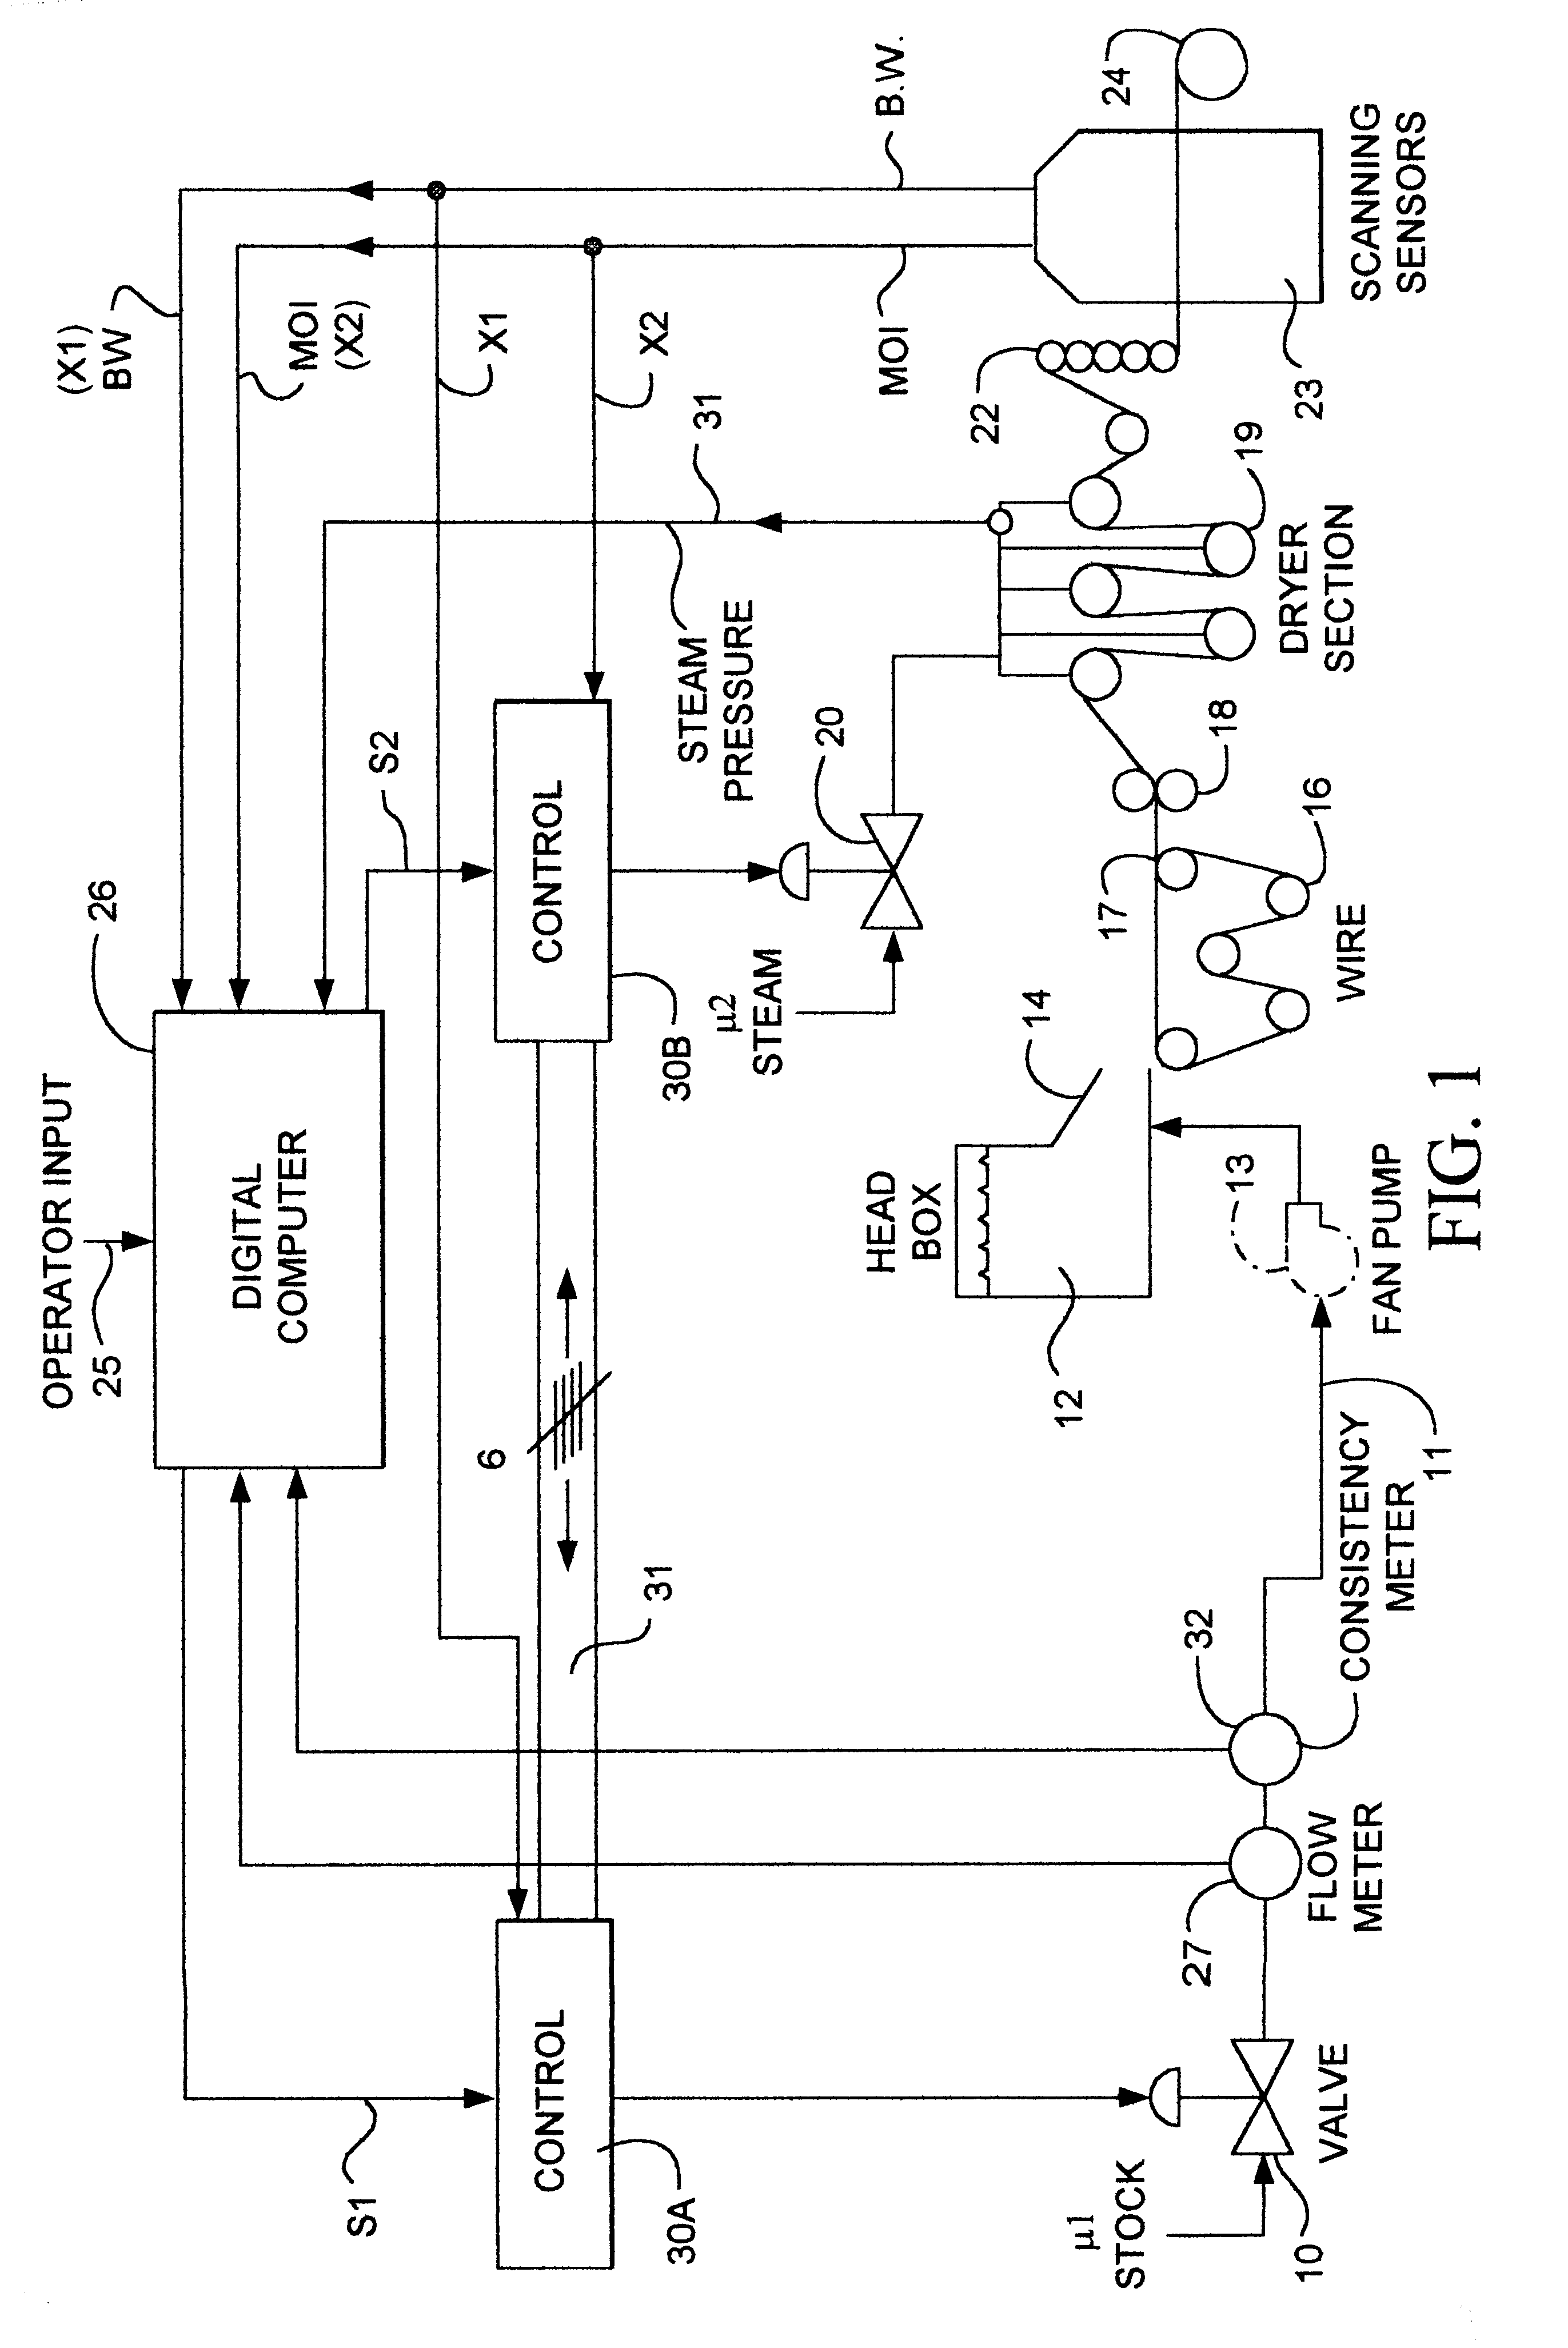 Decoupling controller for use with a process having two input variables and two output variables